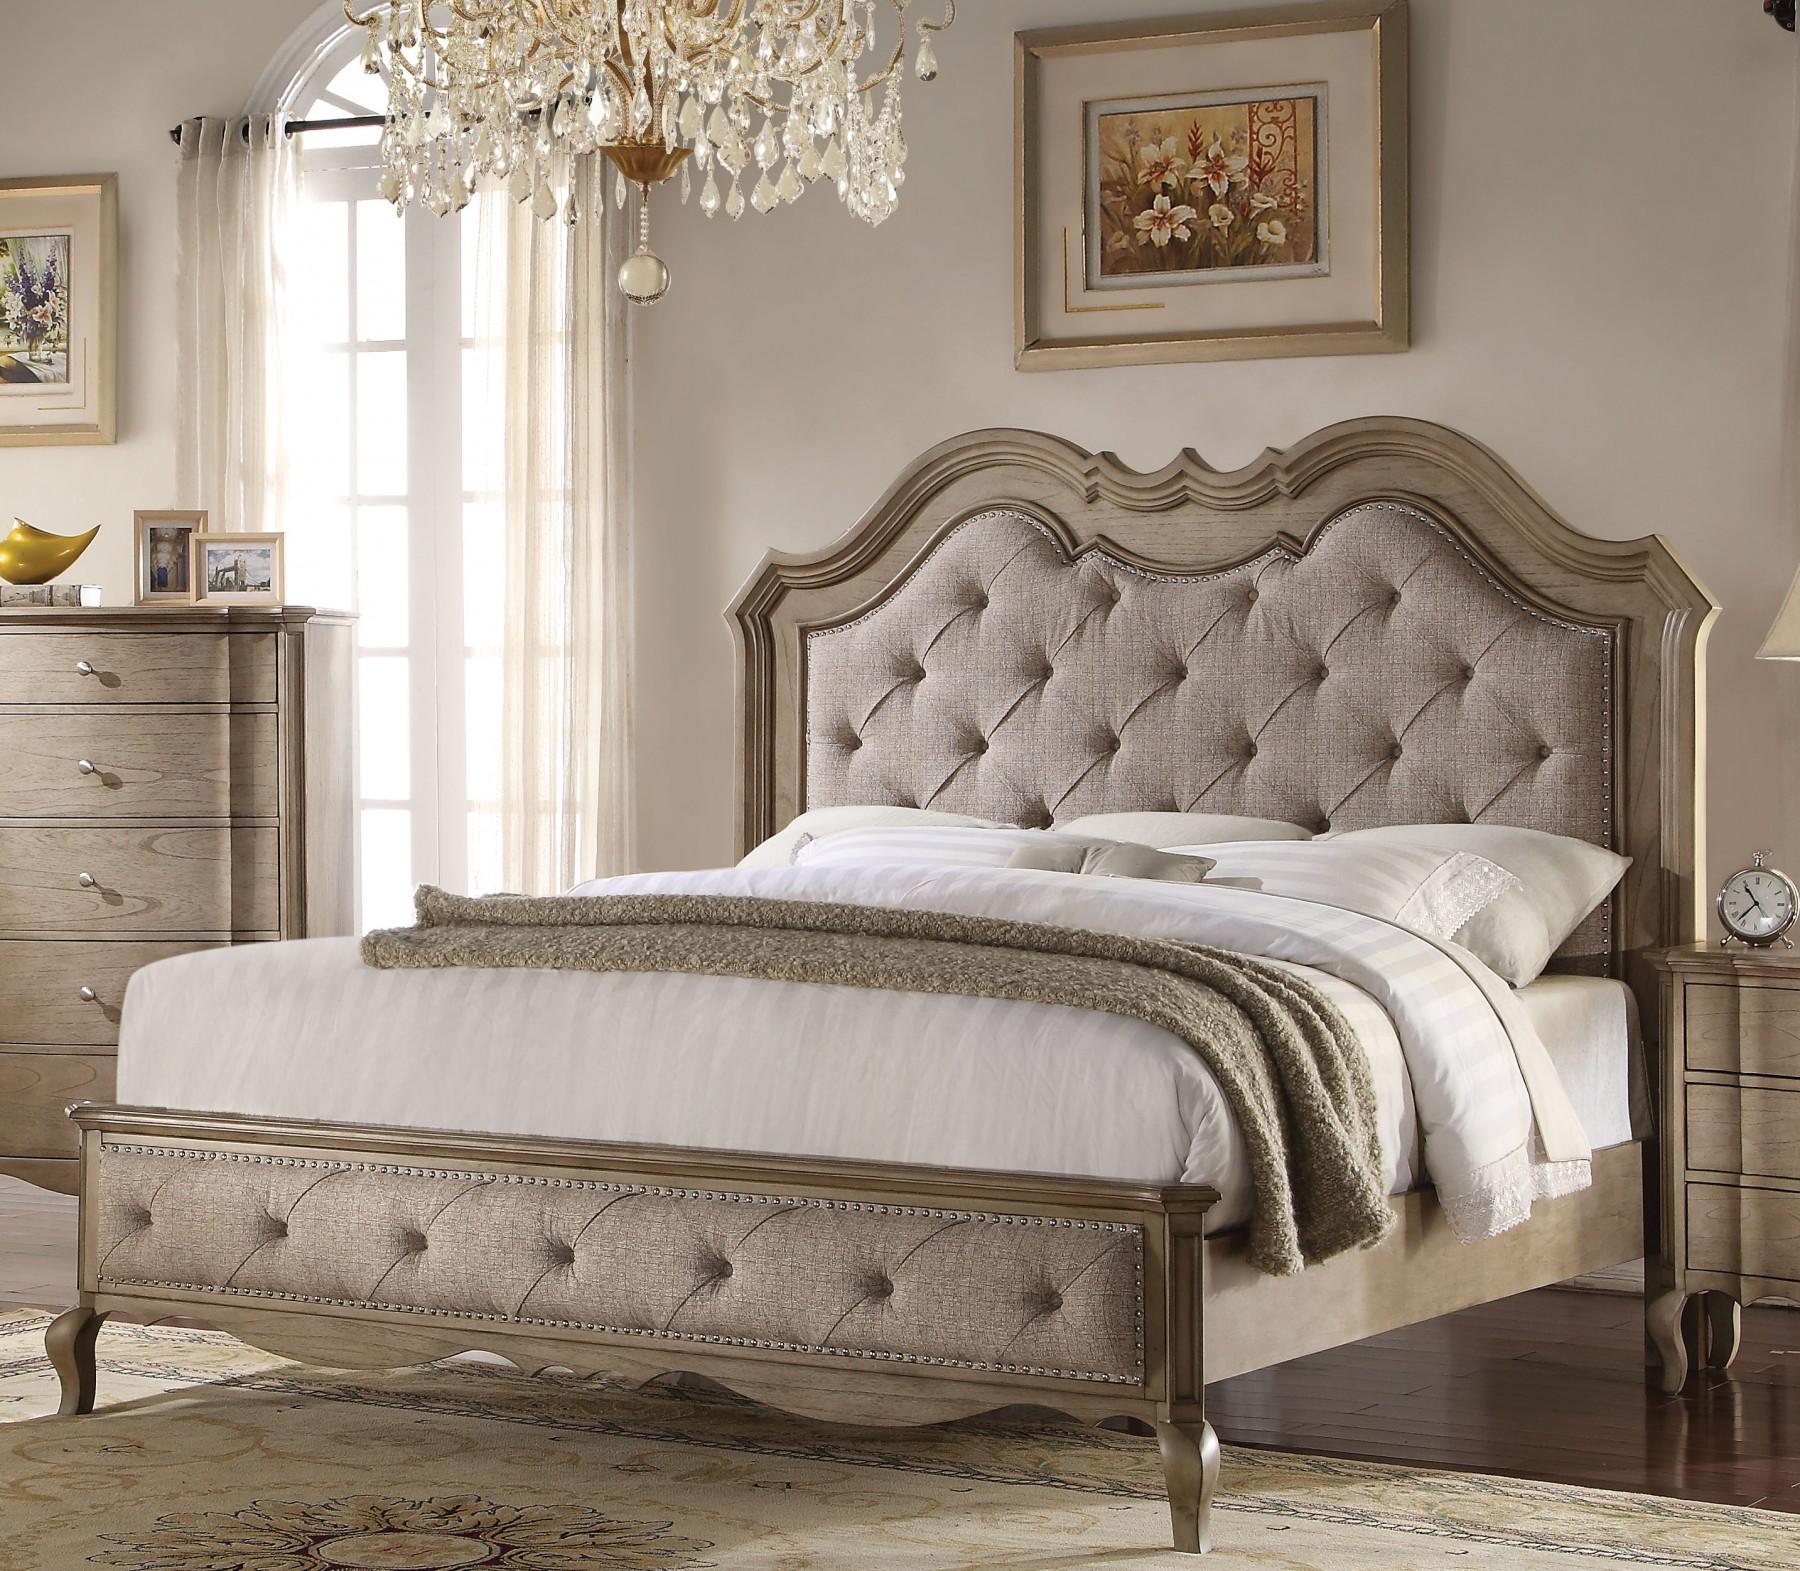 Classic Panel Bed Chelmsford-26050Q Chelmsford-26050Q in Taupe, Beige Fabric